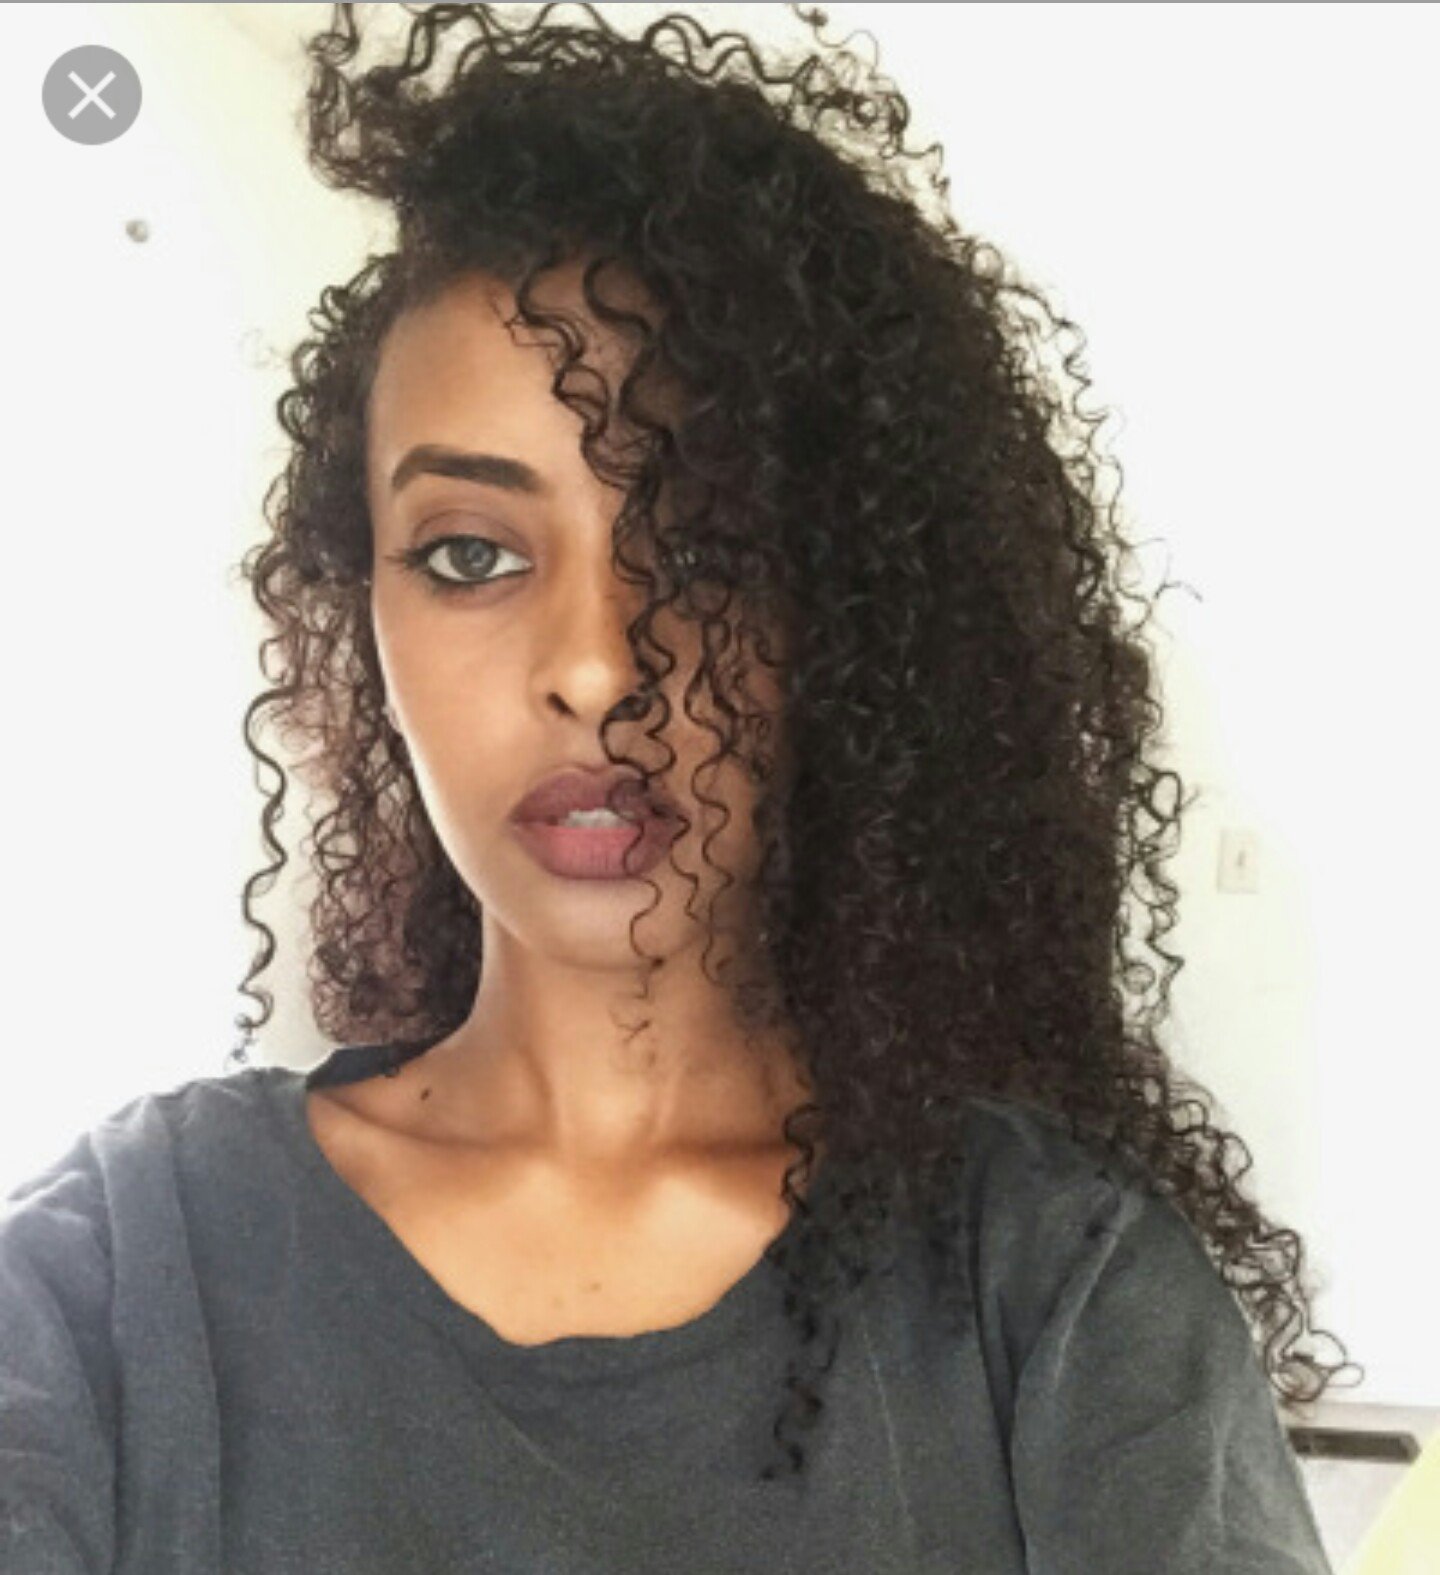  ERITREA  IS BEAUTIFUL  on Twitter Those curly haired 